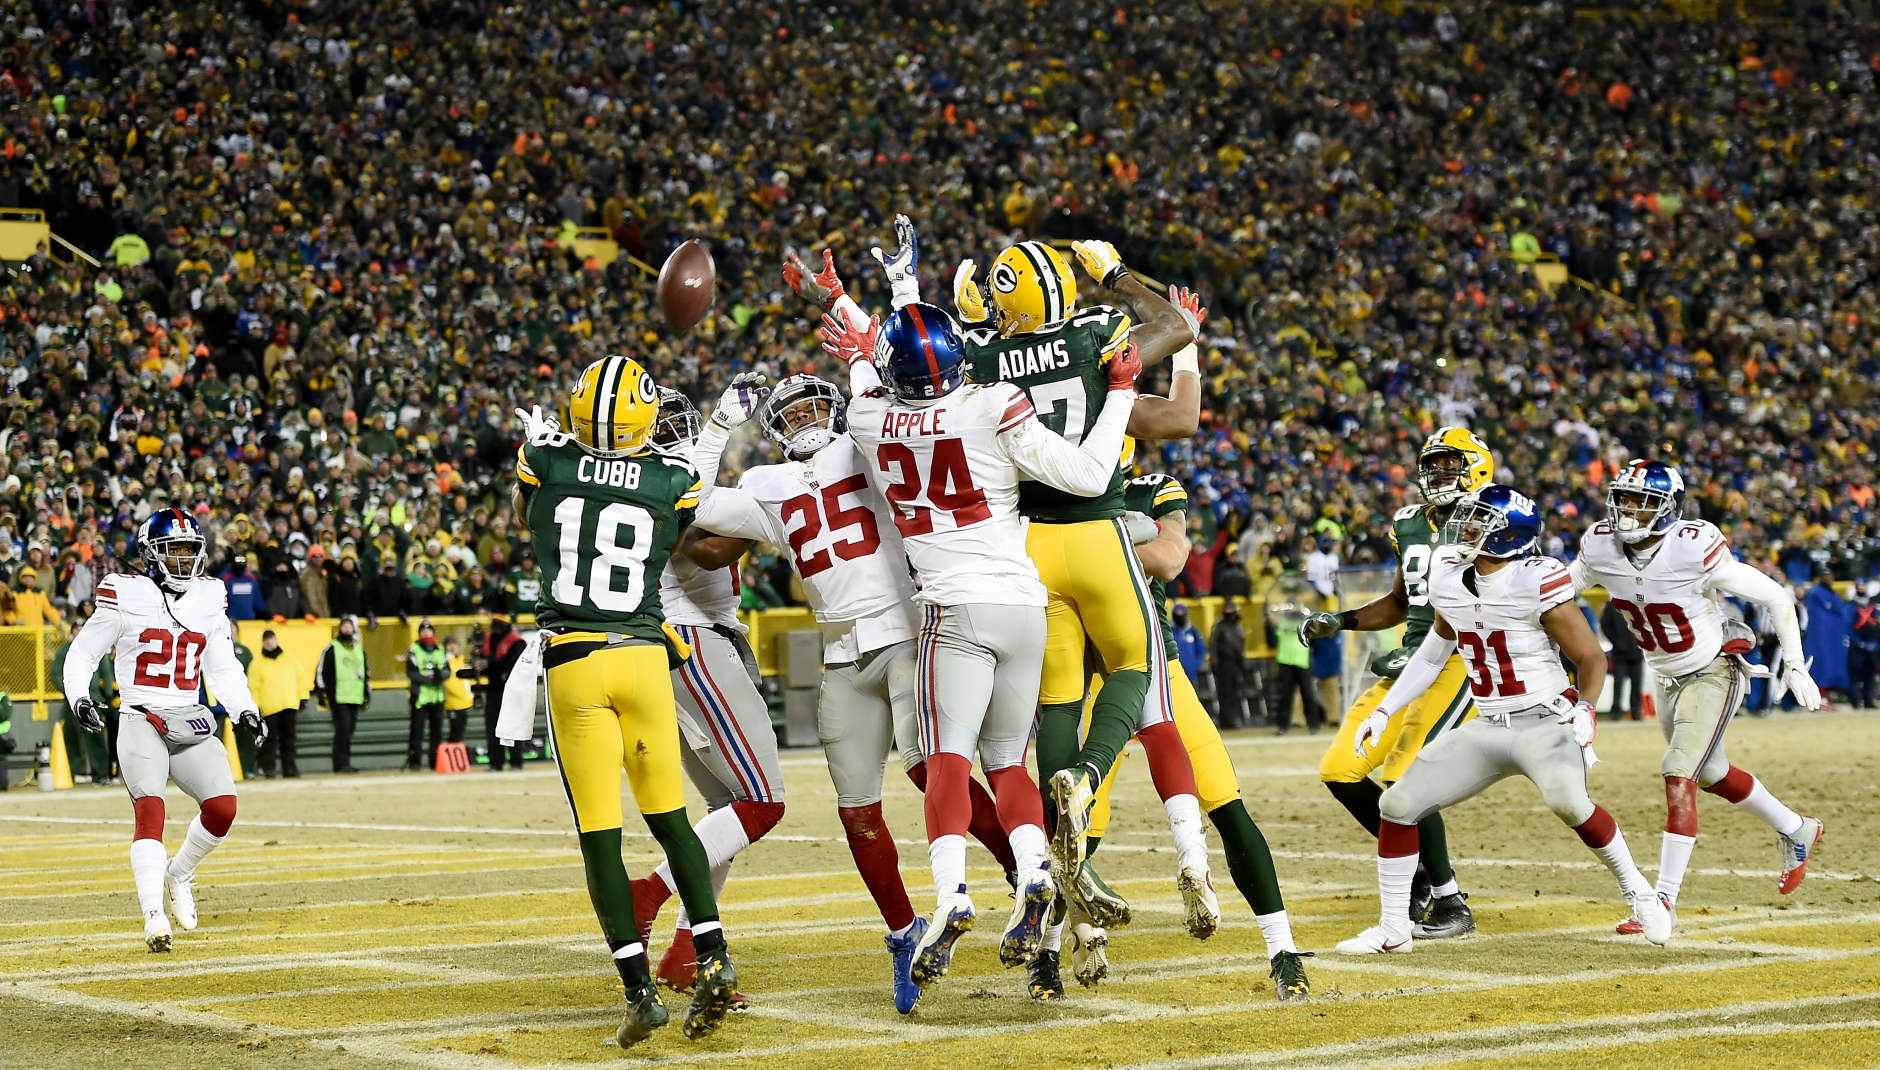 GREEN BAY, WI - JANUARY 08:  Randall Cobb #18 of the Green Bay Packers catches a touchdown pass in the second quarter during the NFC Wild Card game against the New York Giants at Lambeau Field on January 8, 2017 in Green Bay, Wisconsin.  (Photo by Stacy Revere/Getty Images)